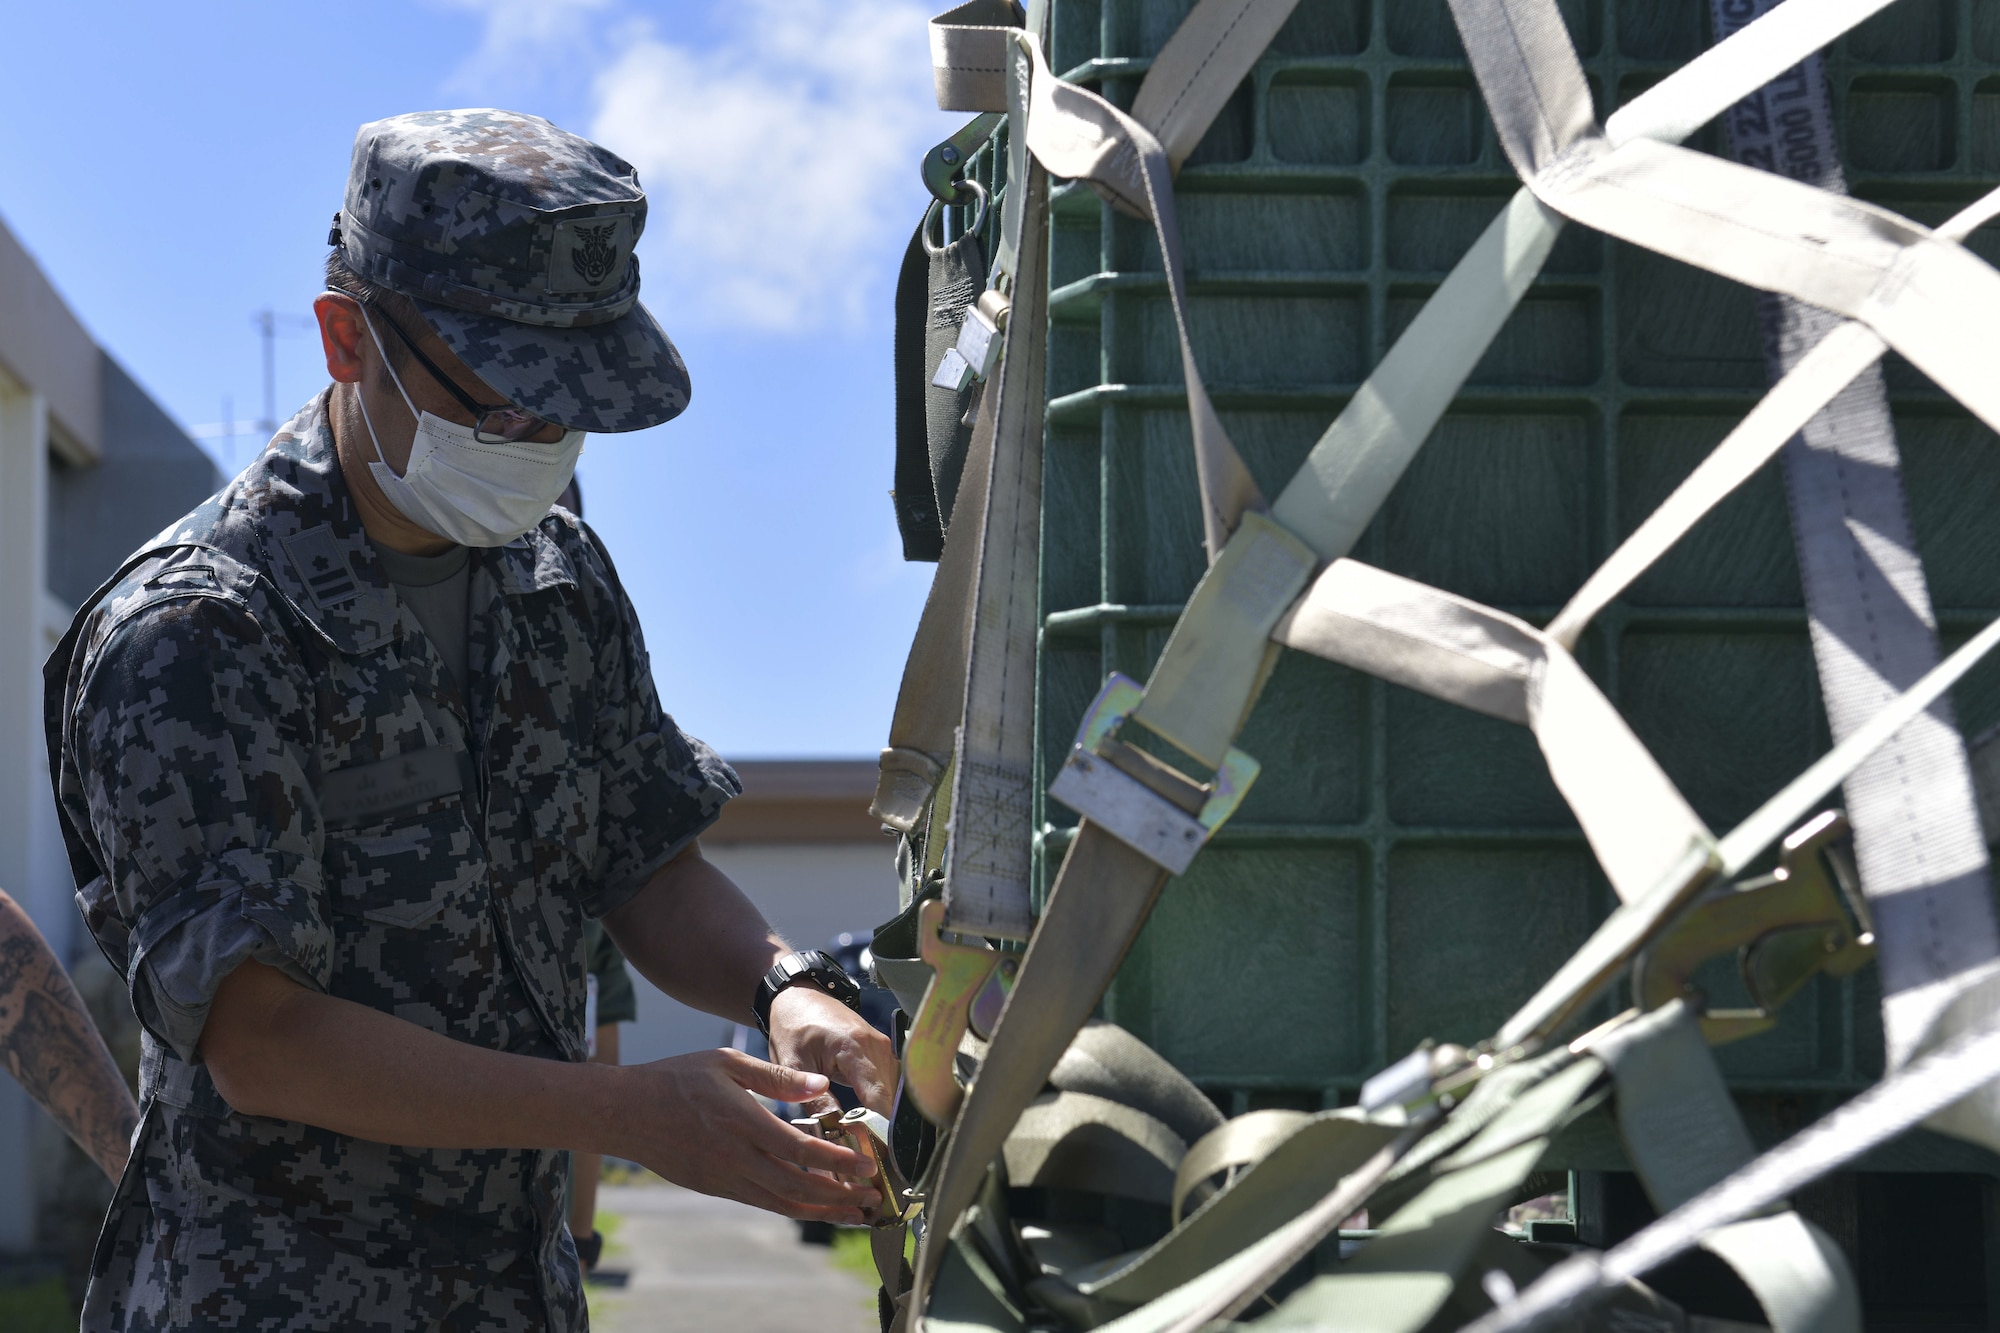 A Japanese military member adjusts some straps on a package